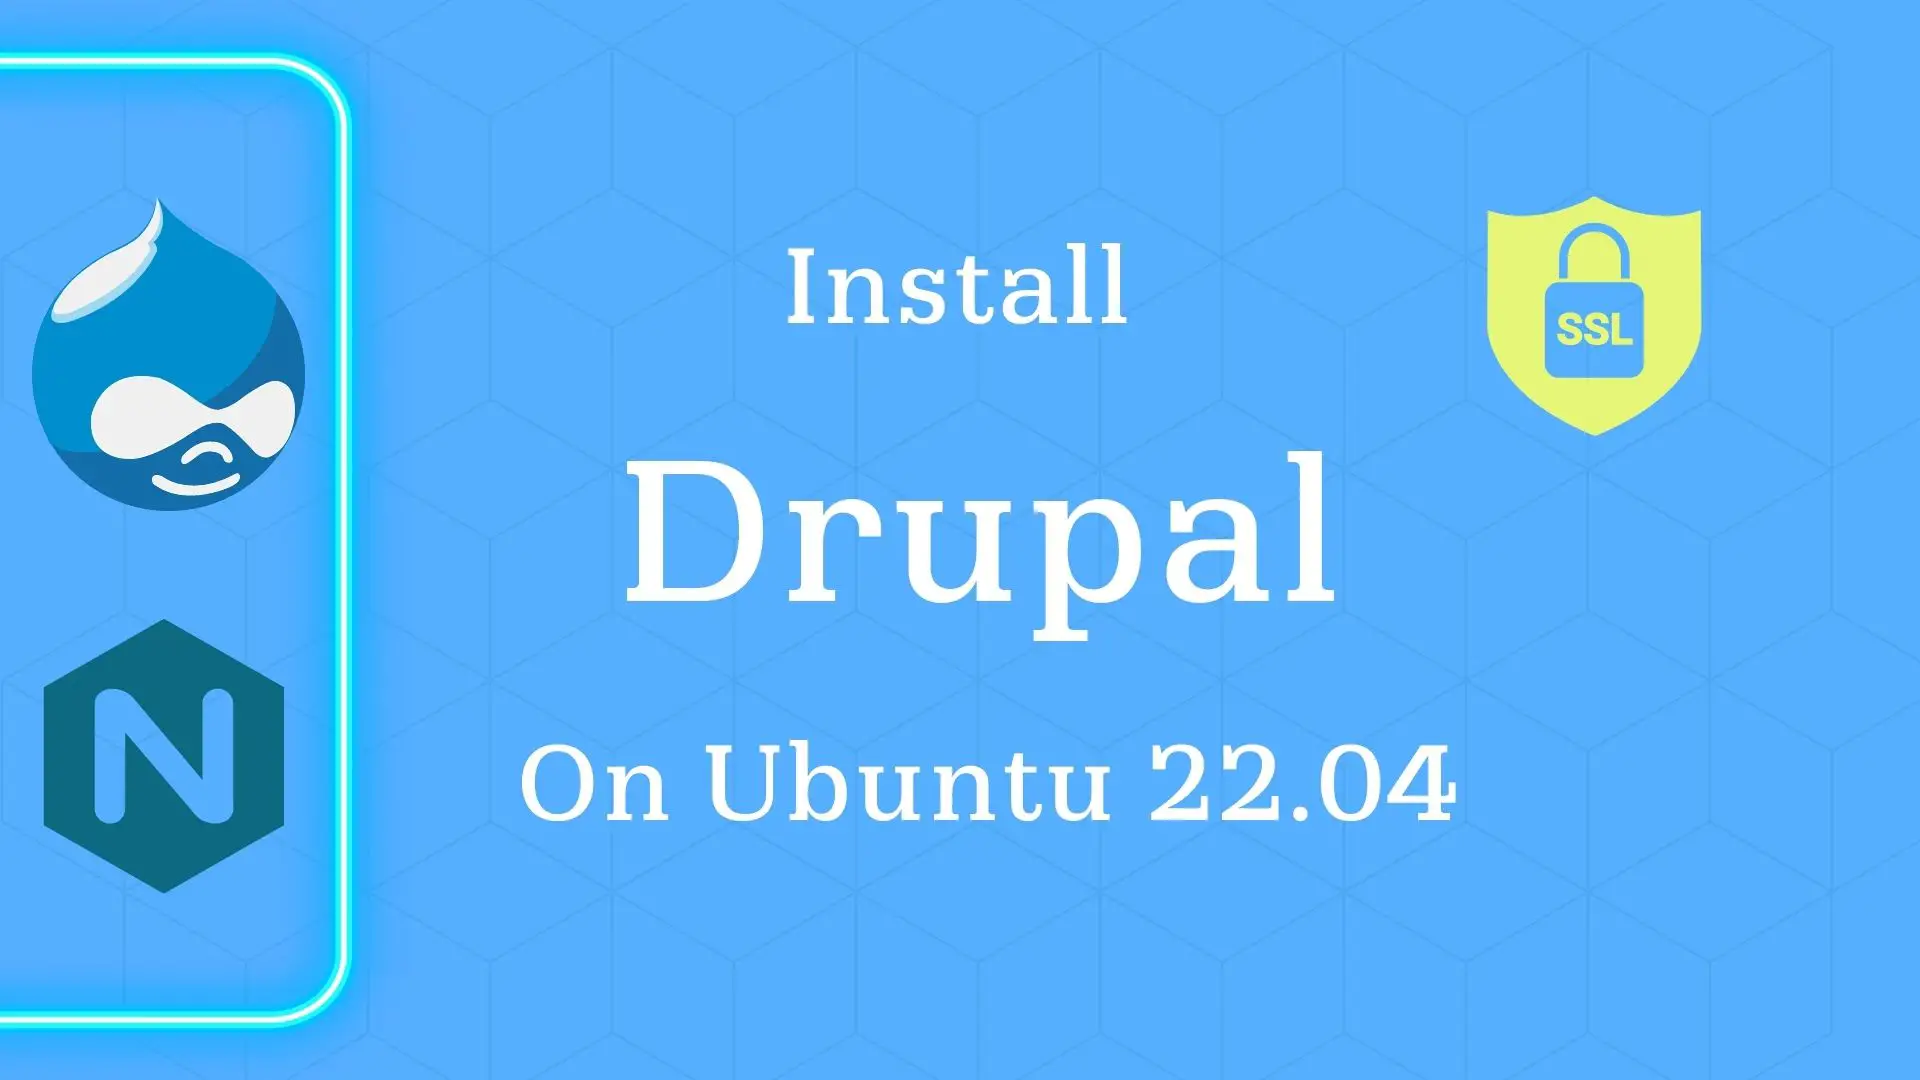 How to Install Drupal with Nginx and Let's Encrypt SSL on Ubuntu 22.04